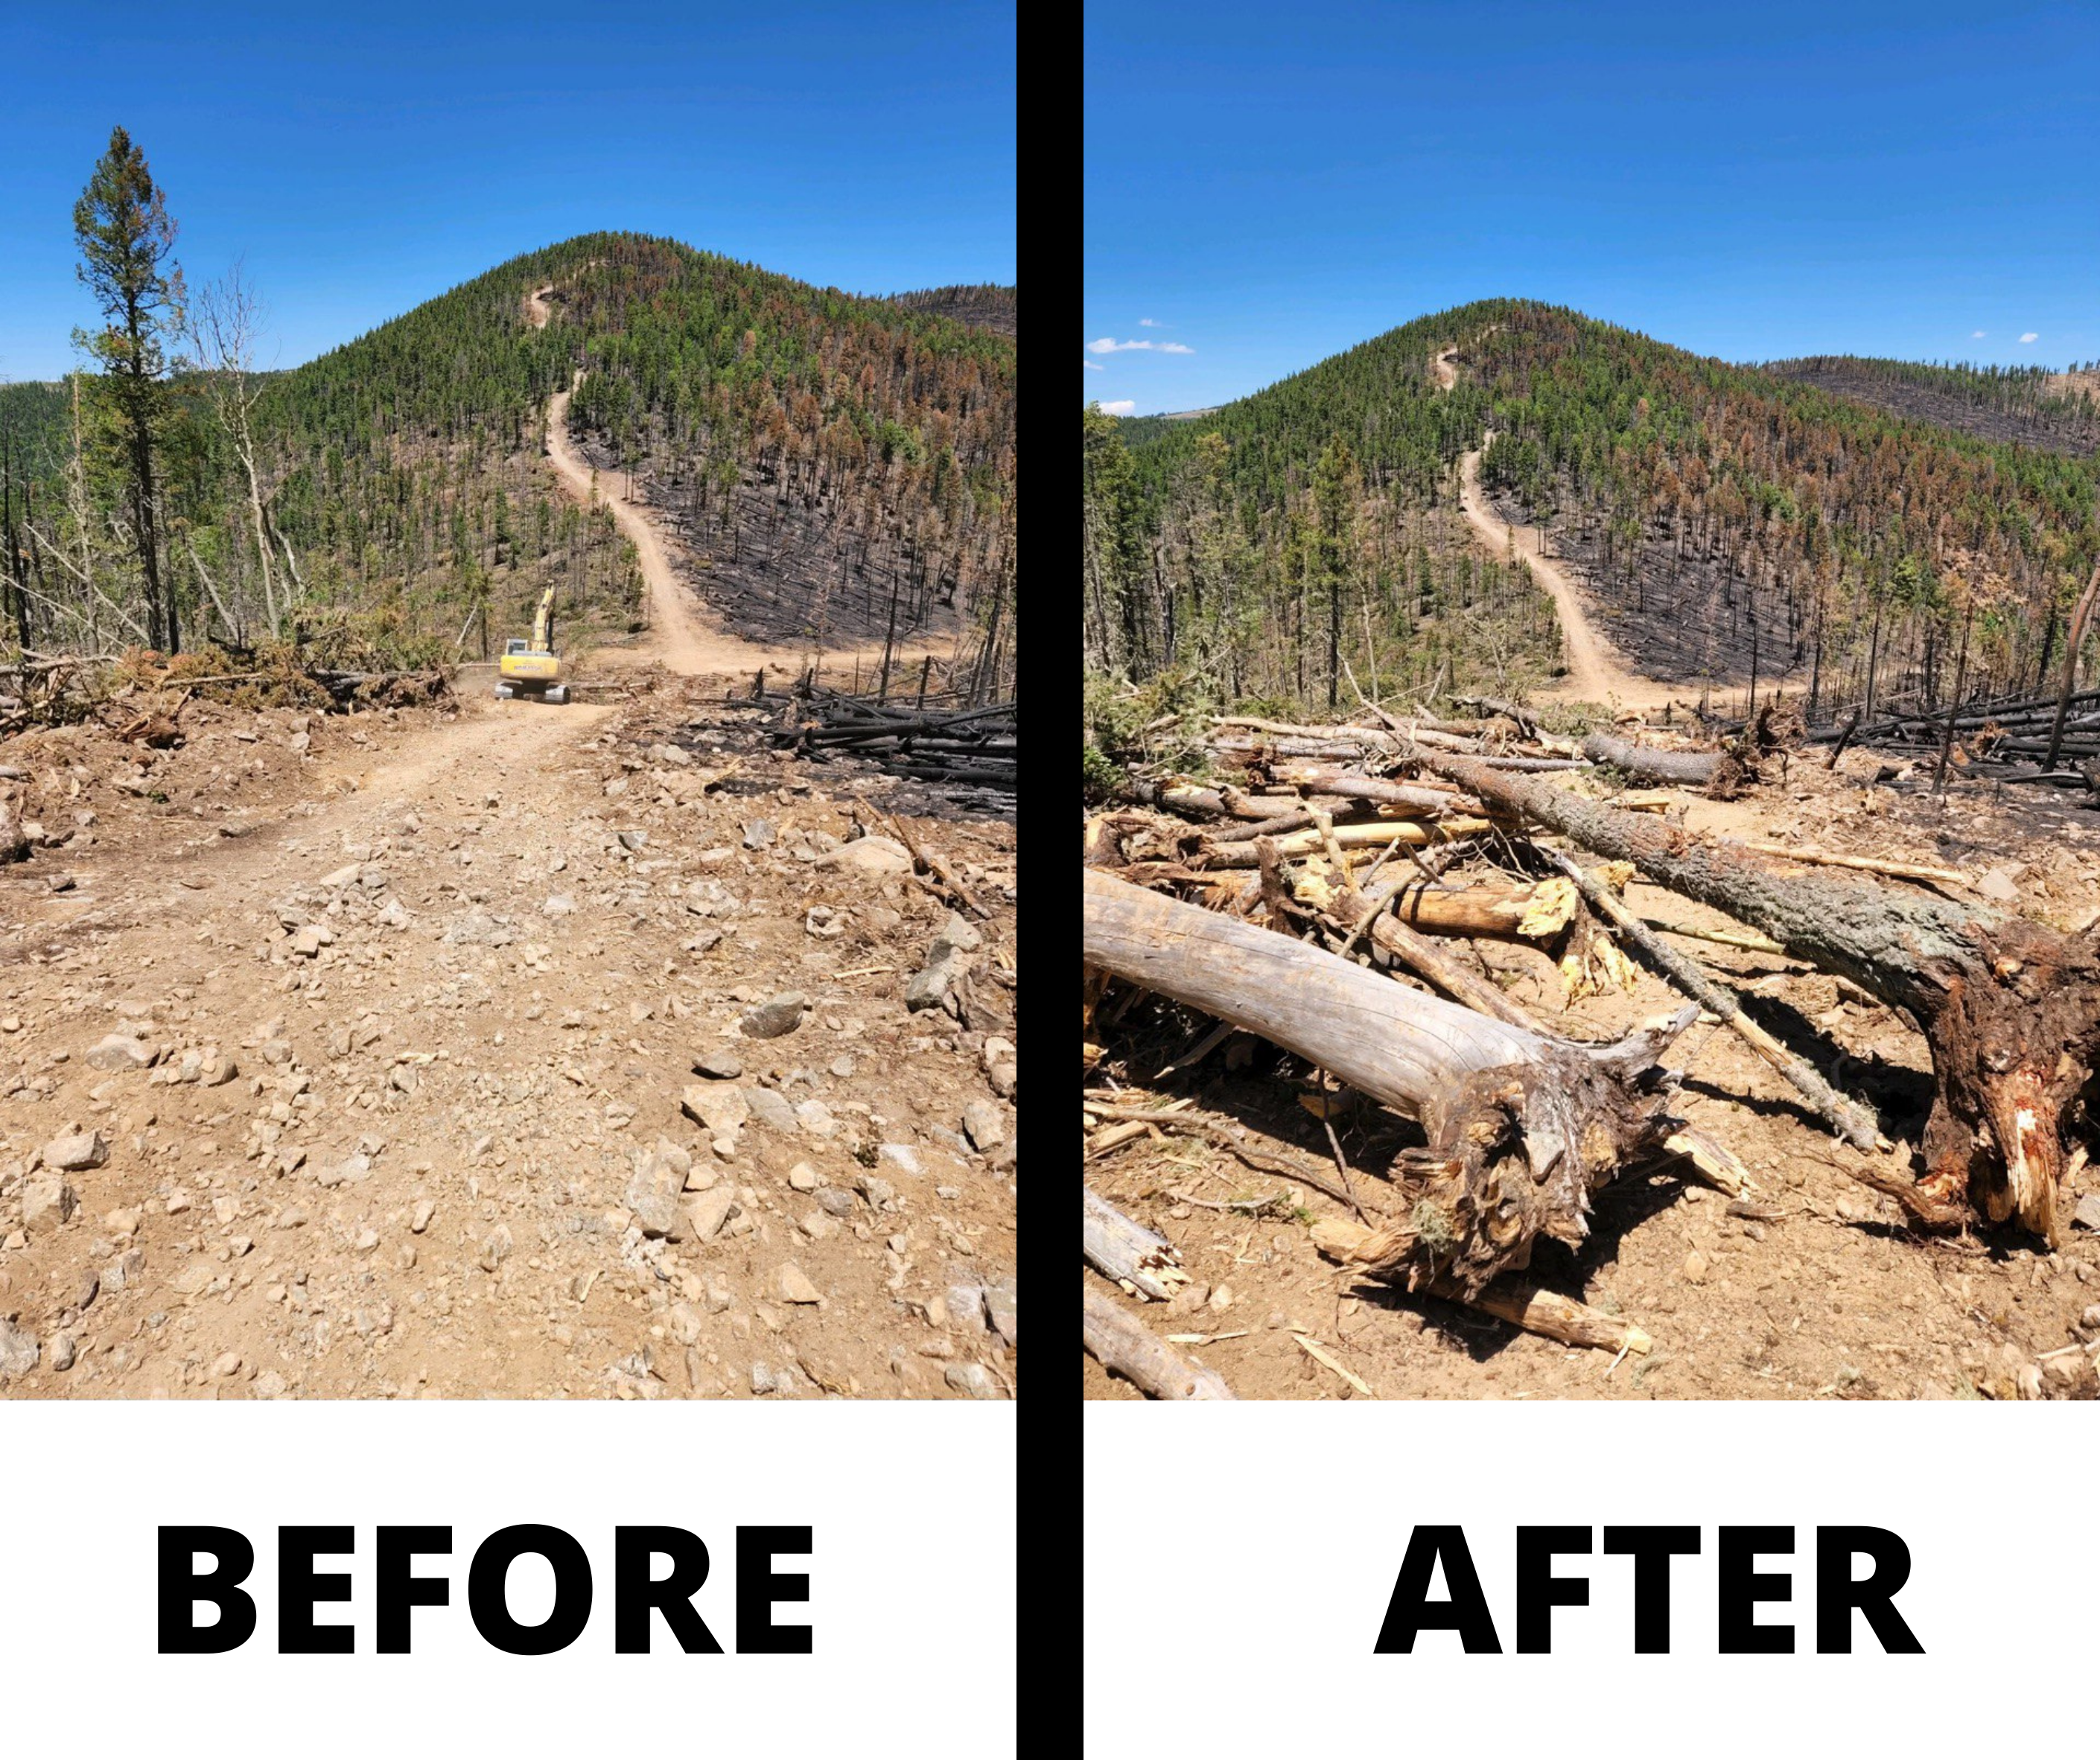 Before and after comparison. Left is before with dozer line looking like a dirt road along ridge top with vegetation on both sides. After shows many logs covering the dirt path made by the dozer. Blue sky in background.